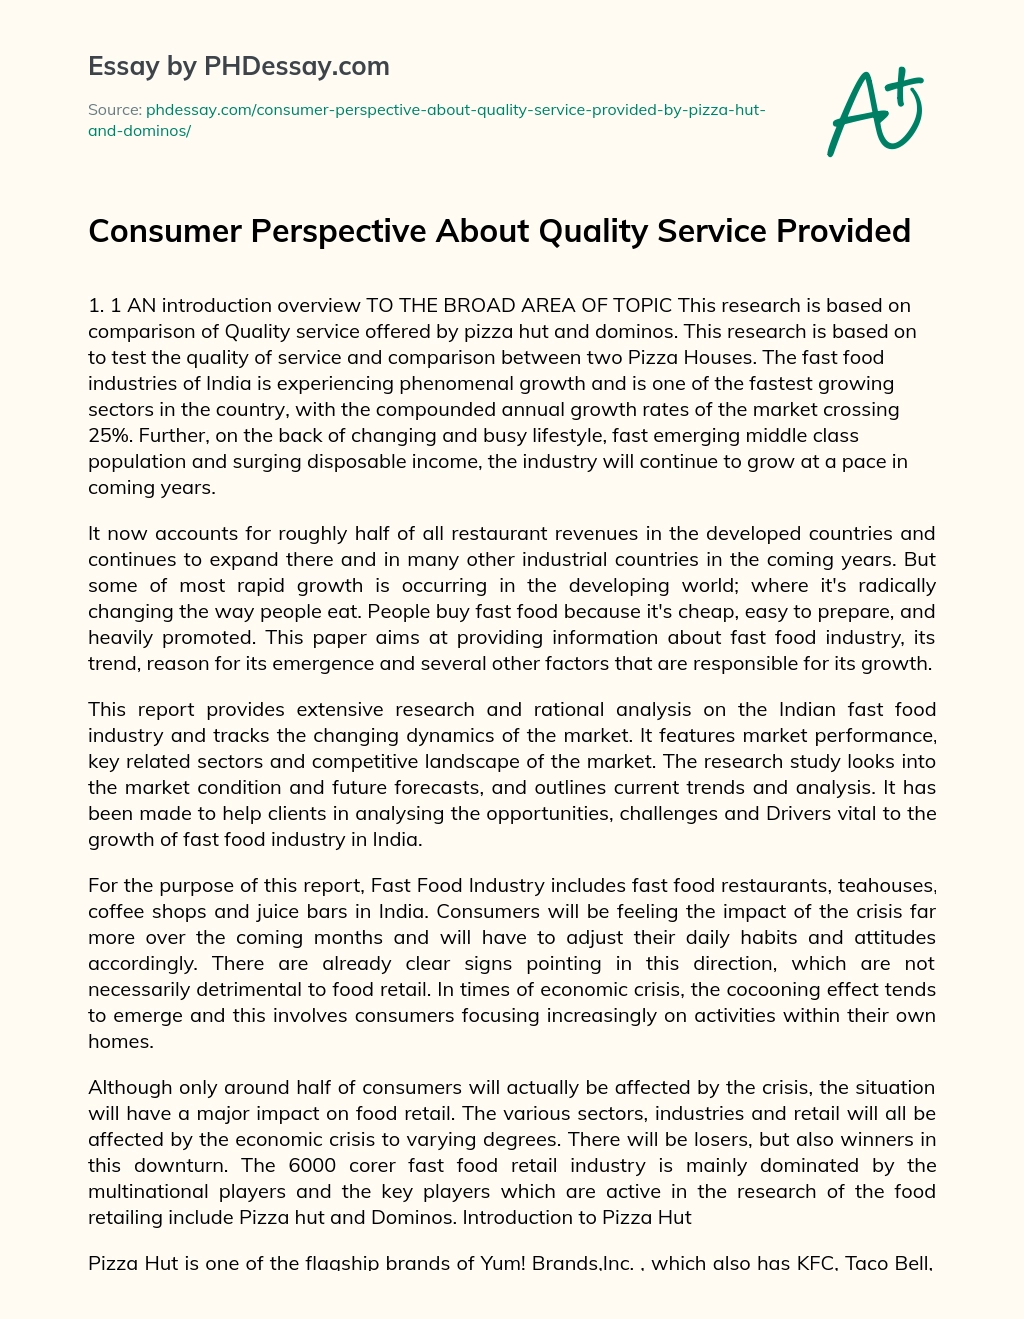 Consumer Perspective About Quality Service Provided essay